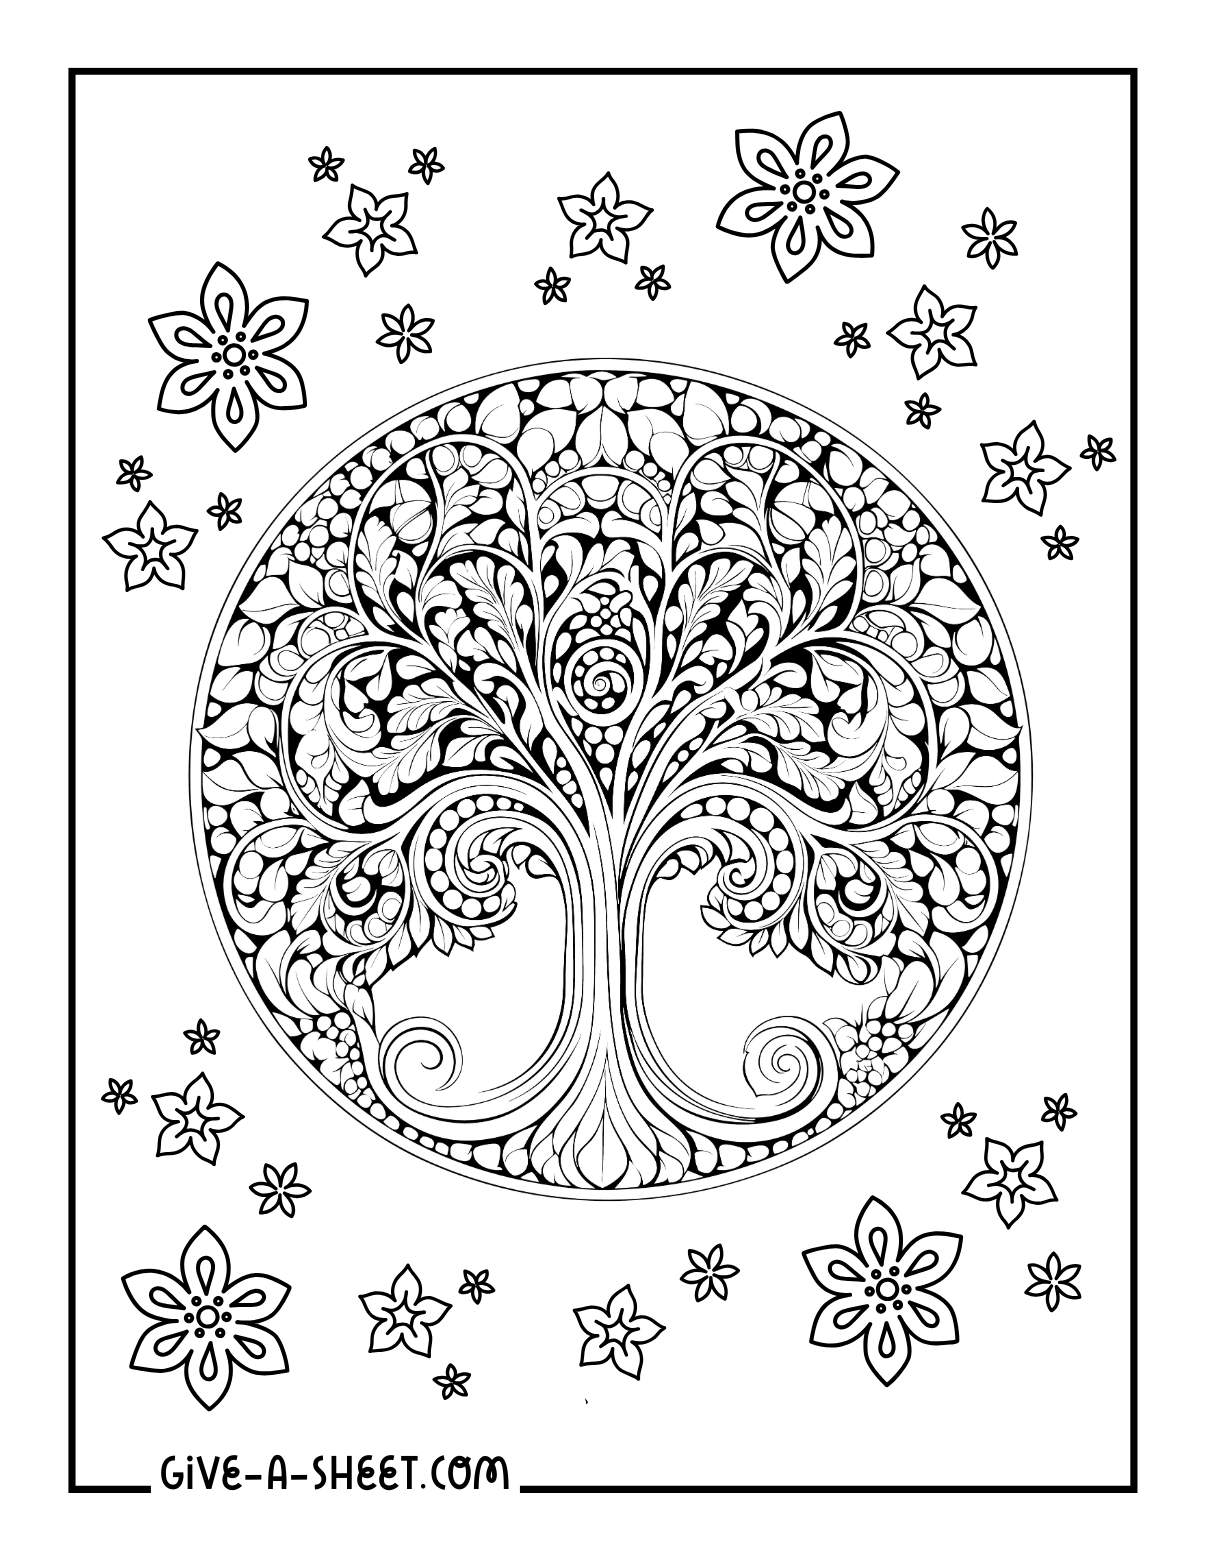 Beautiful trees coloring book for adults.